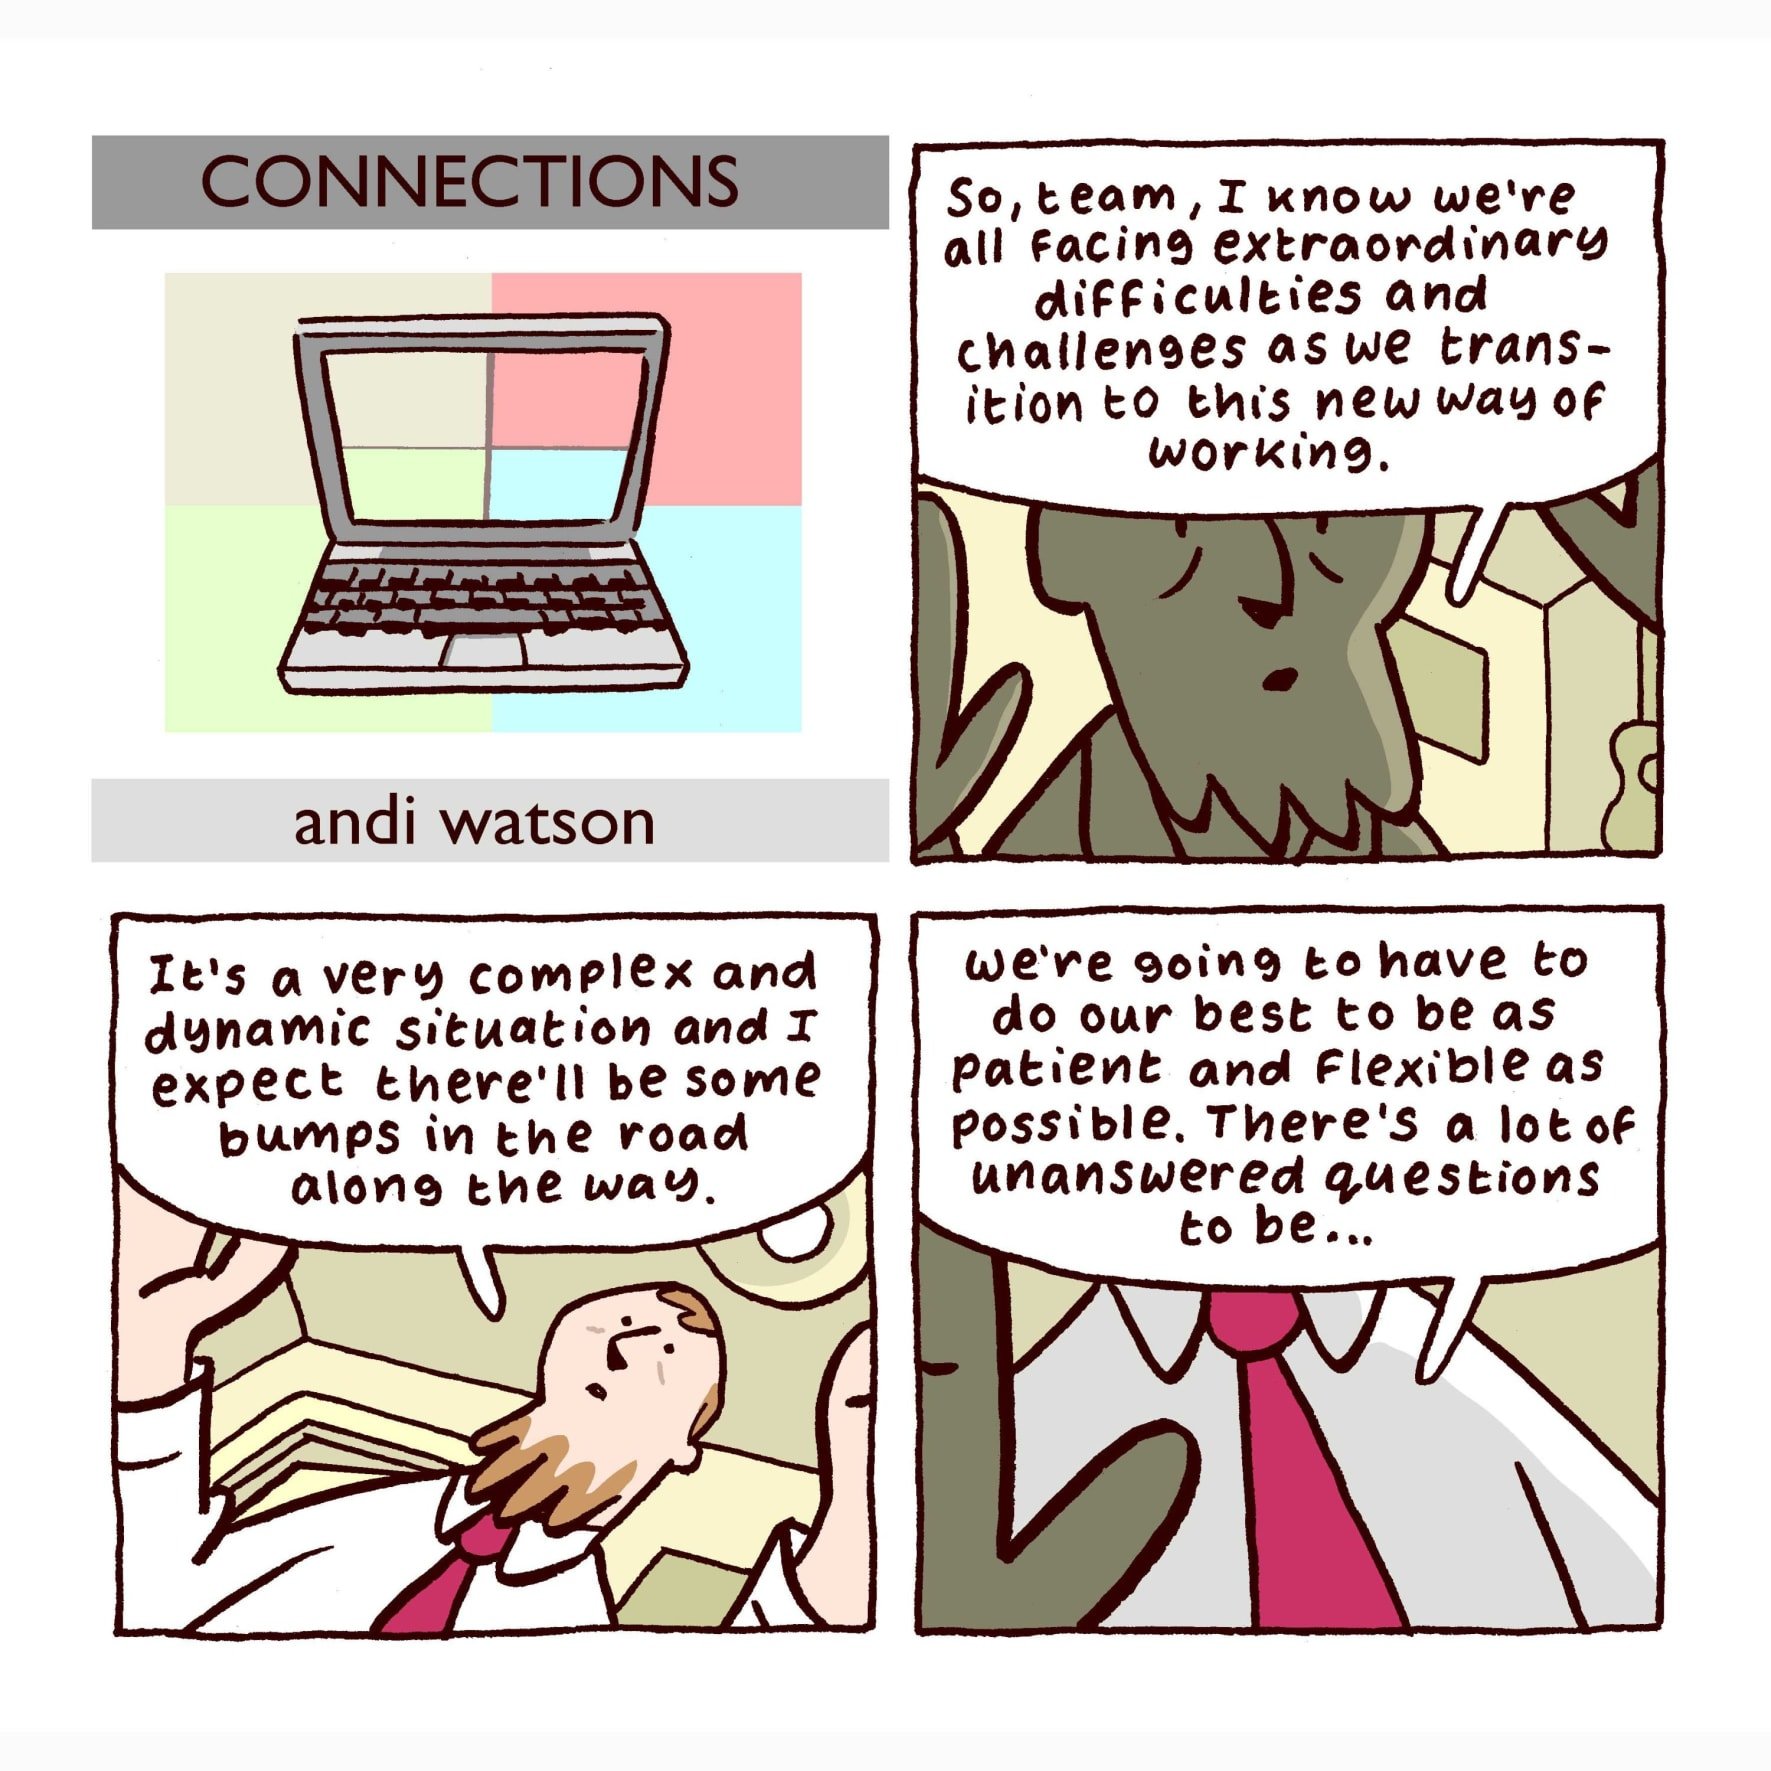 comic strip about connections during the Coronavirus